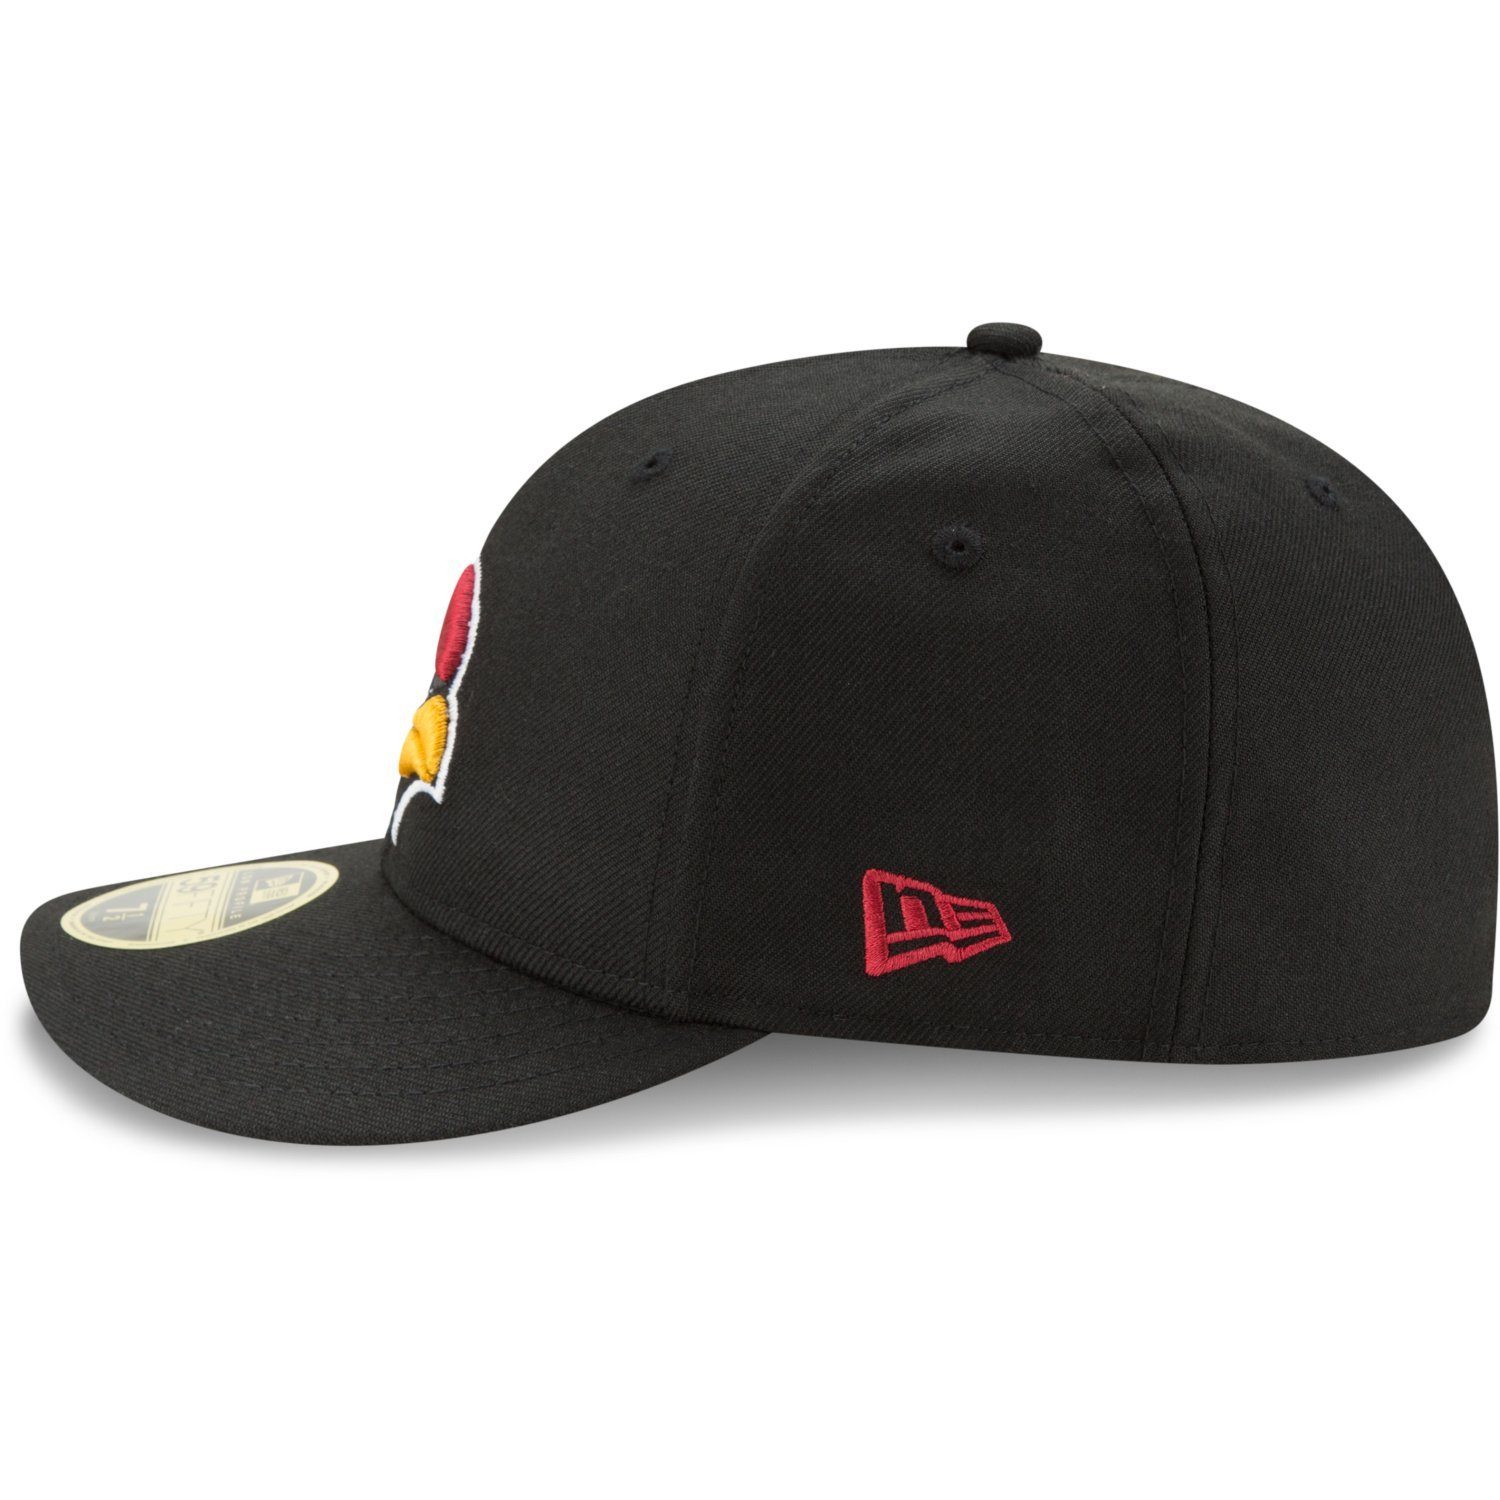 PROFILE LOW Era Cap Fitted Cardinals Arizona 59Fifty New